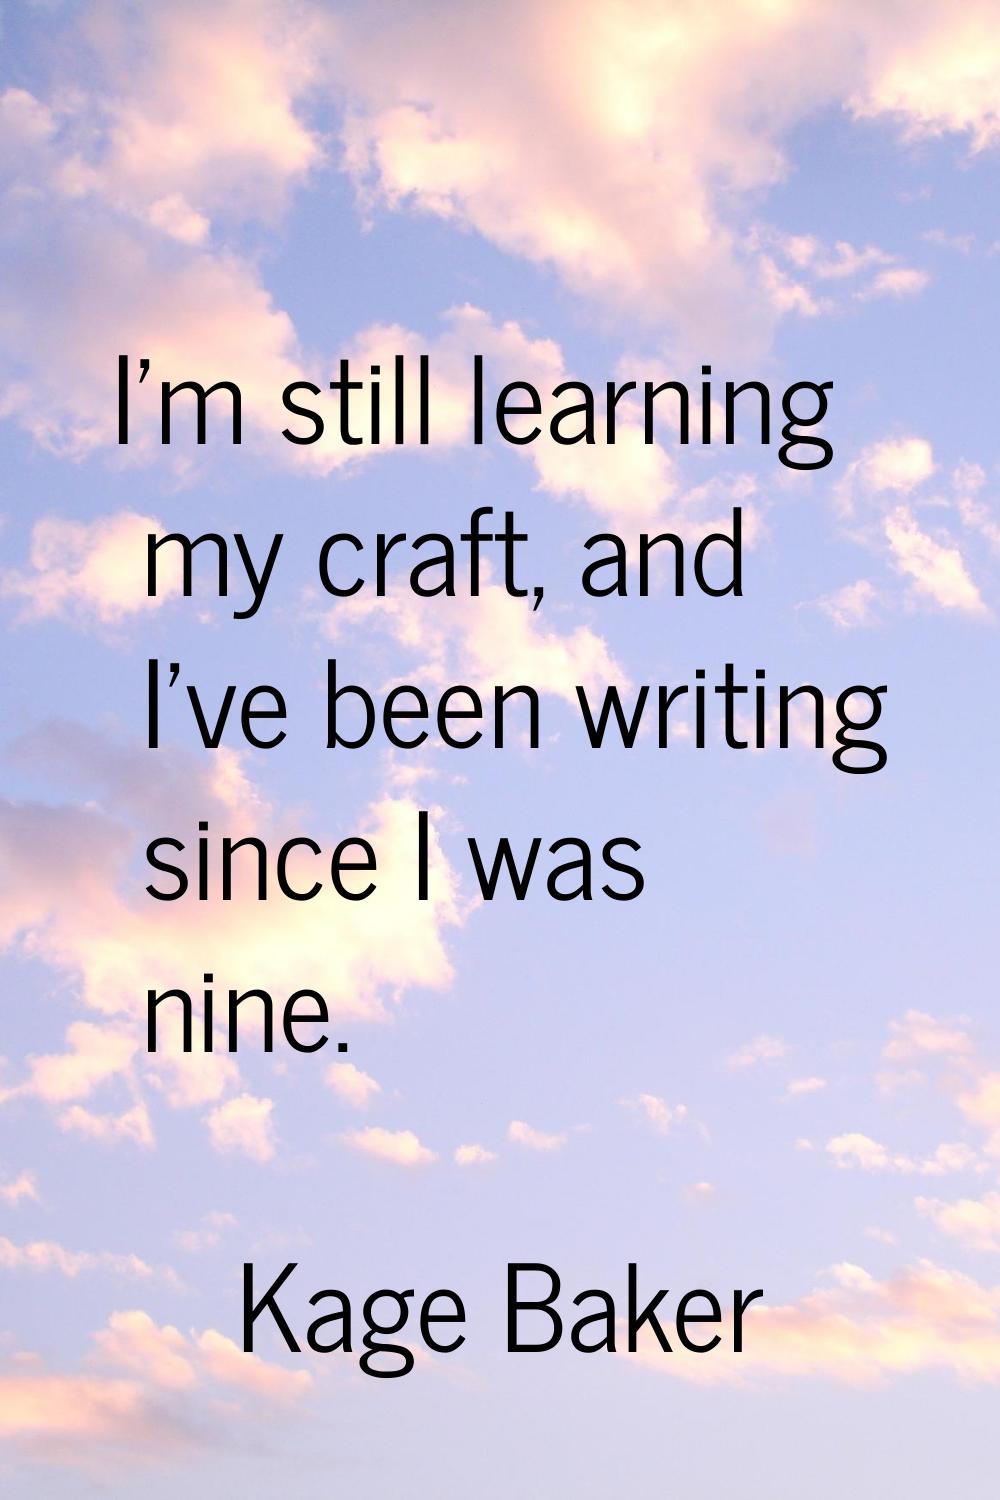 I'm still learning my craft, and I've been writing since I was nine.